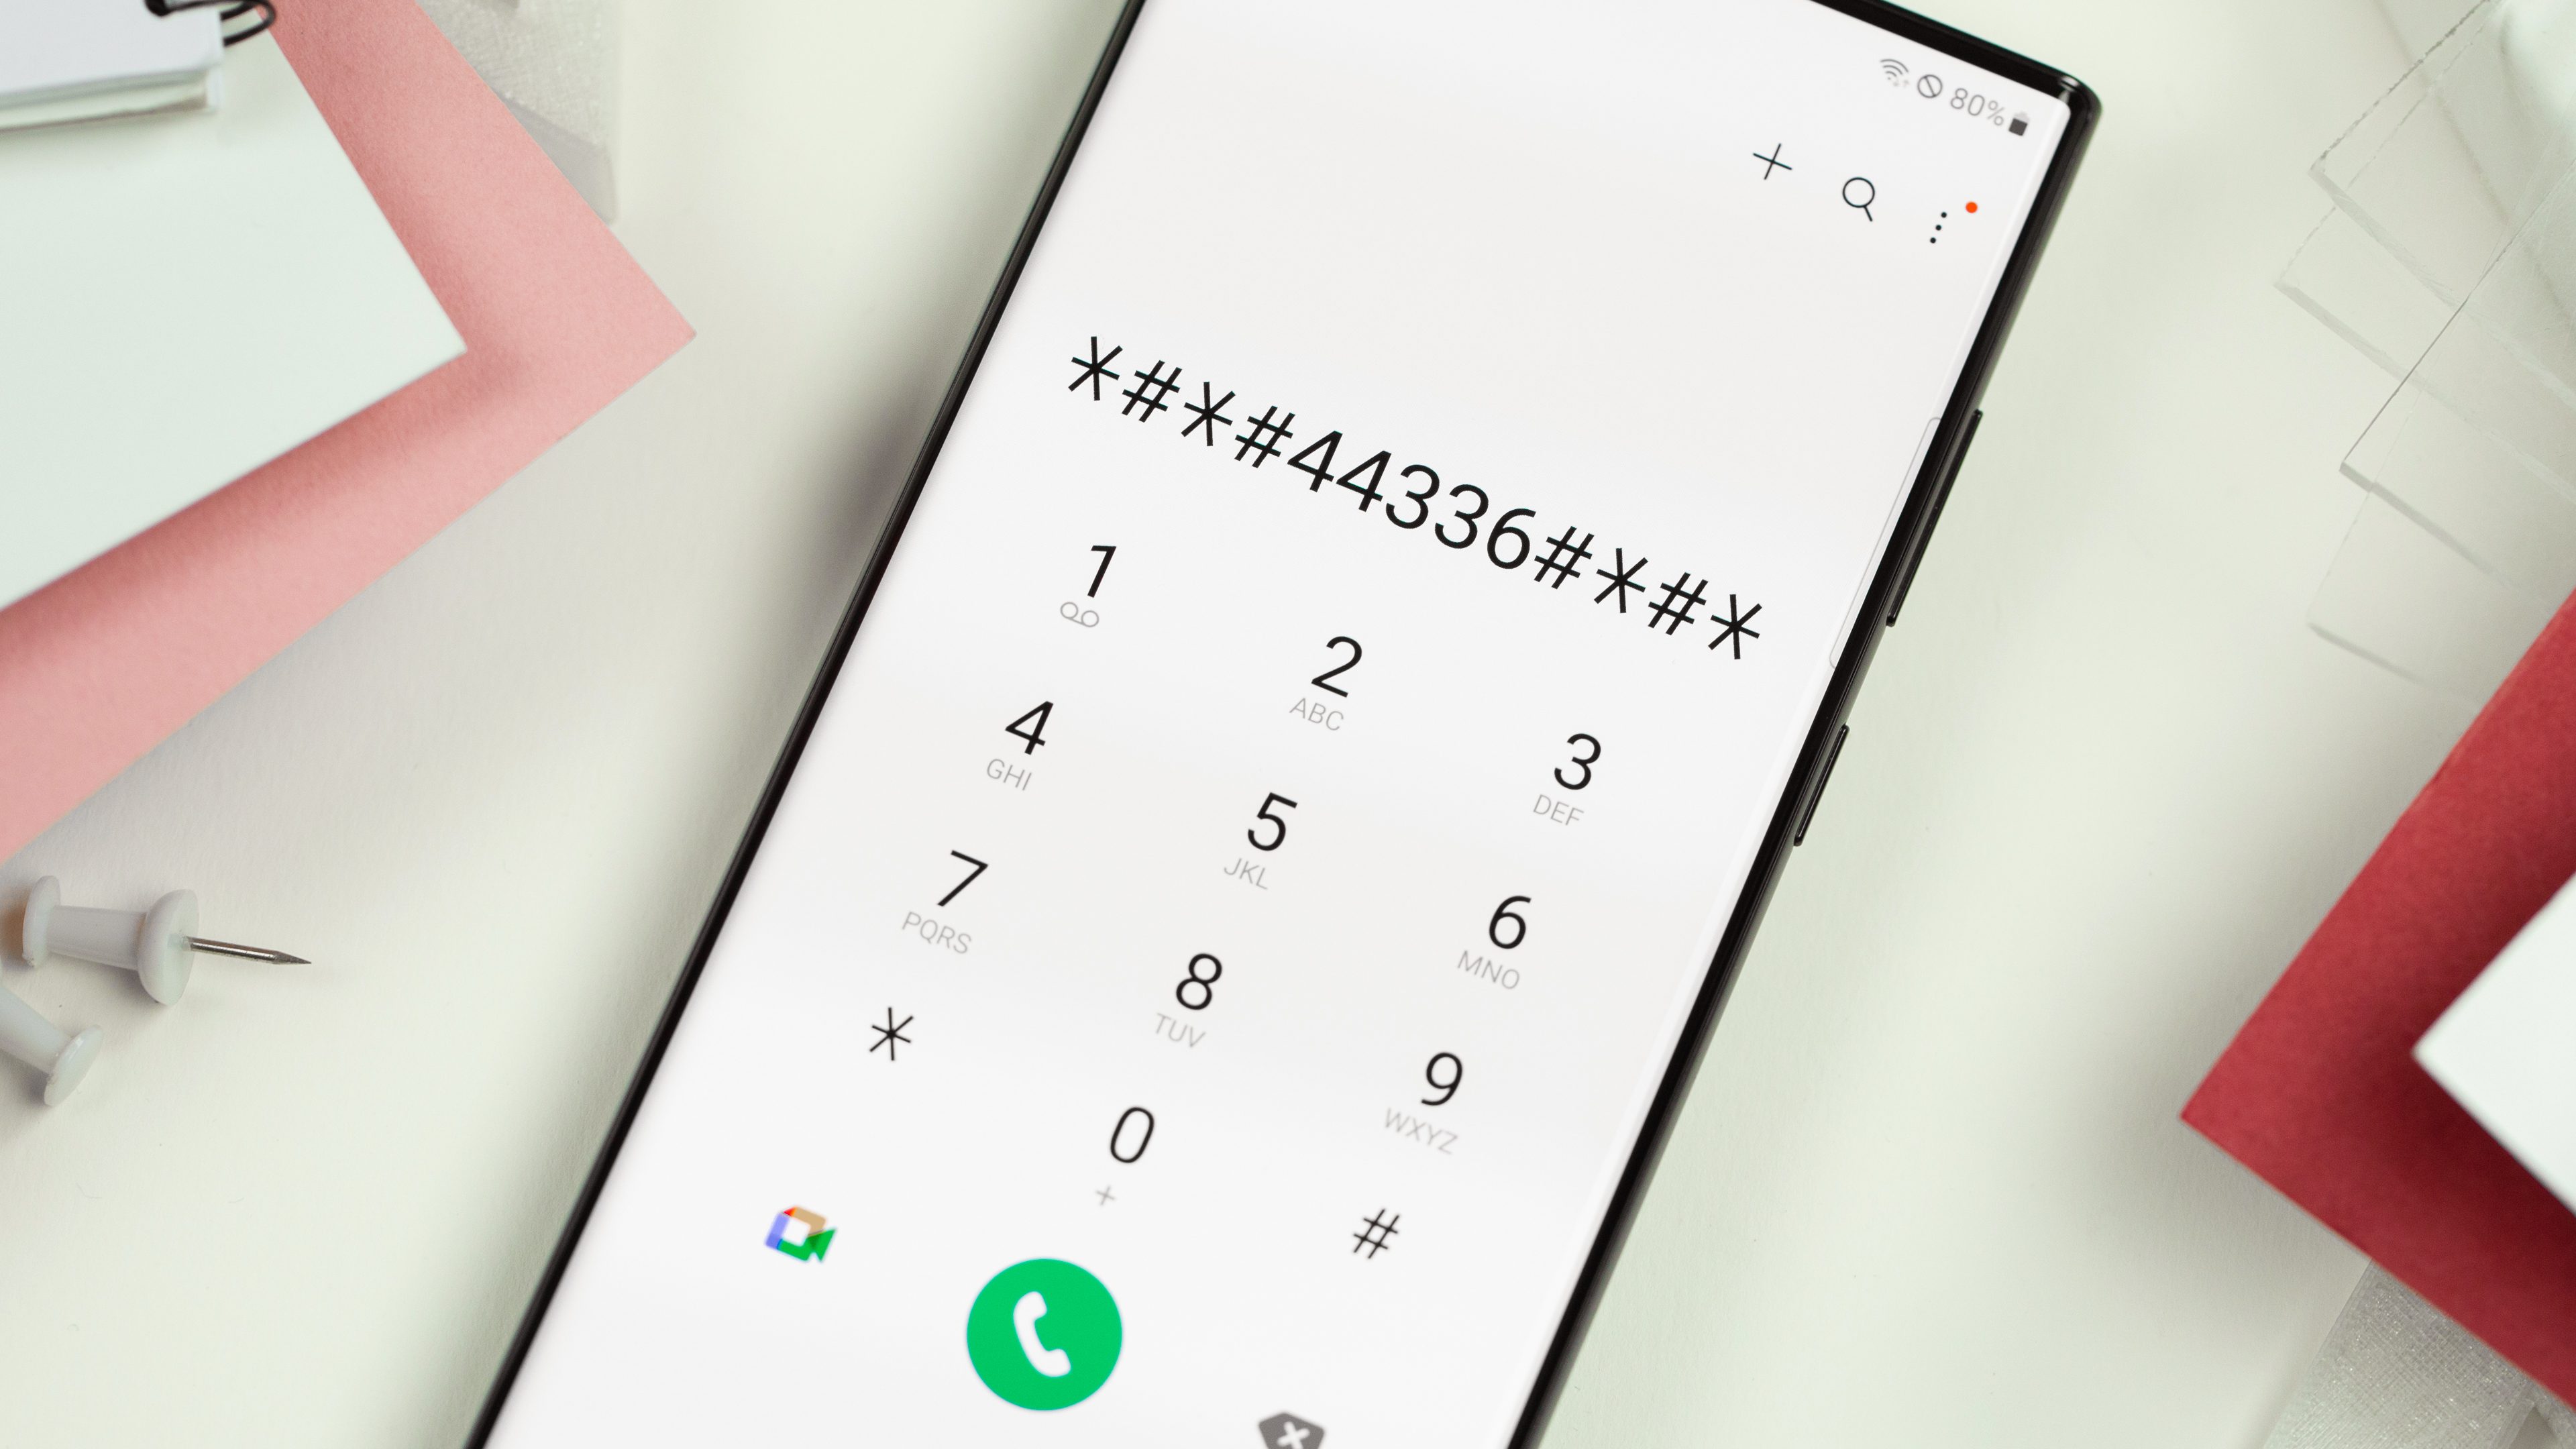 Most Useful Hidden Secret Codes for Android phones